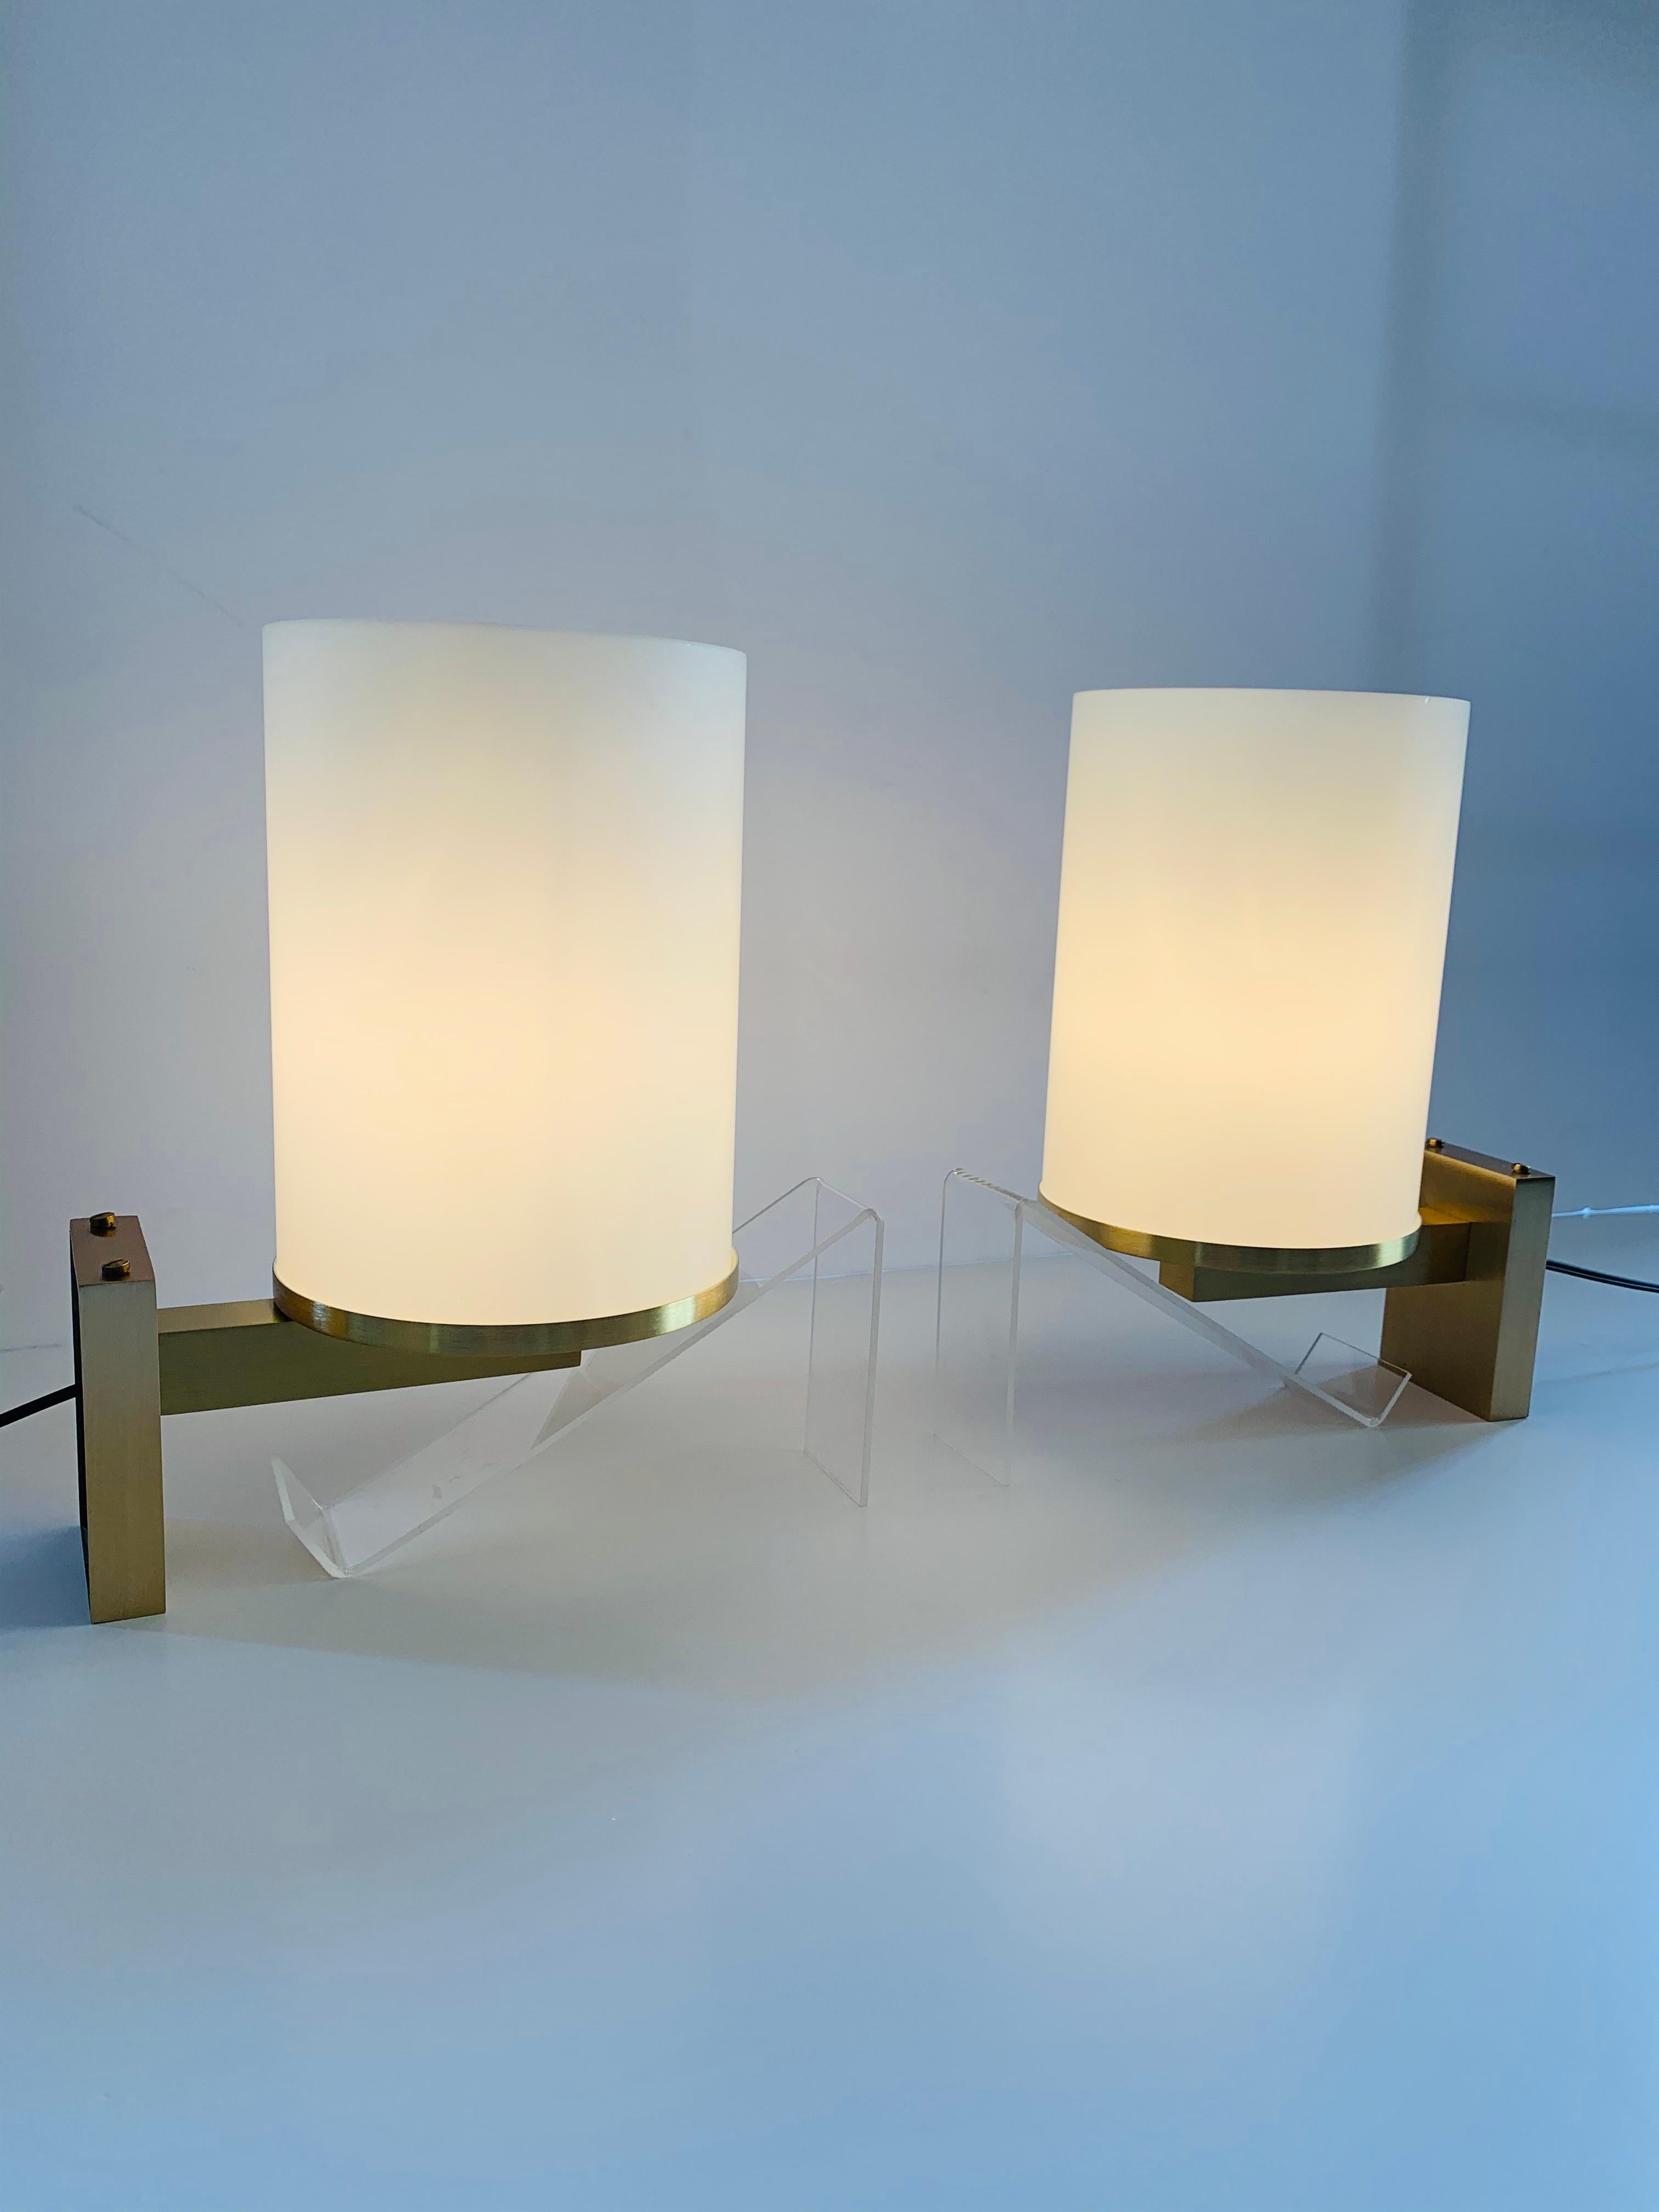 Rare Pair of Signed Perzel Sconces

 Period 1930

 Frosted optical glass cylinder model

 Brass frame signed Perzel on the edge

 Rare set and of superb quality!!


 The glasses and the frame are in immaculate condition.

 The pair